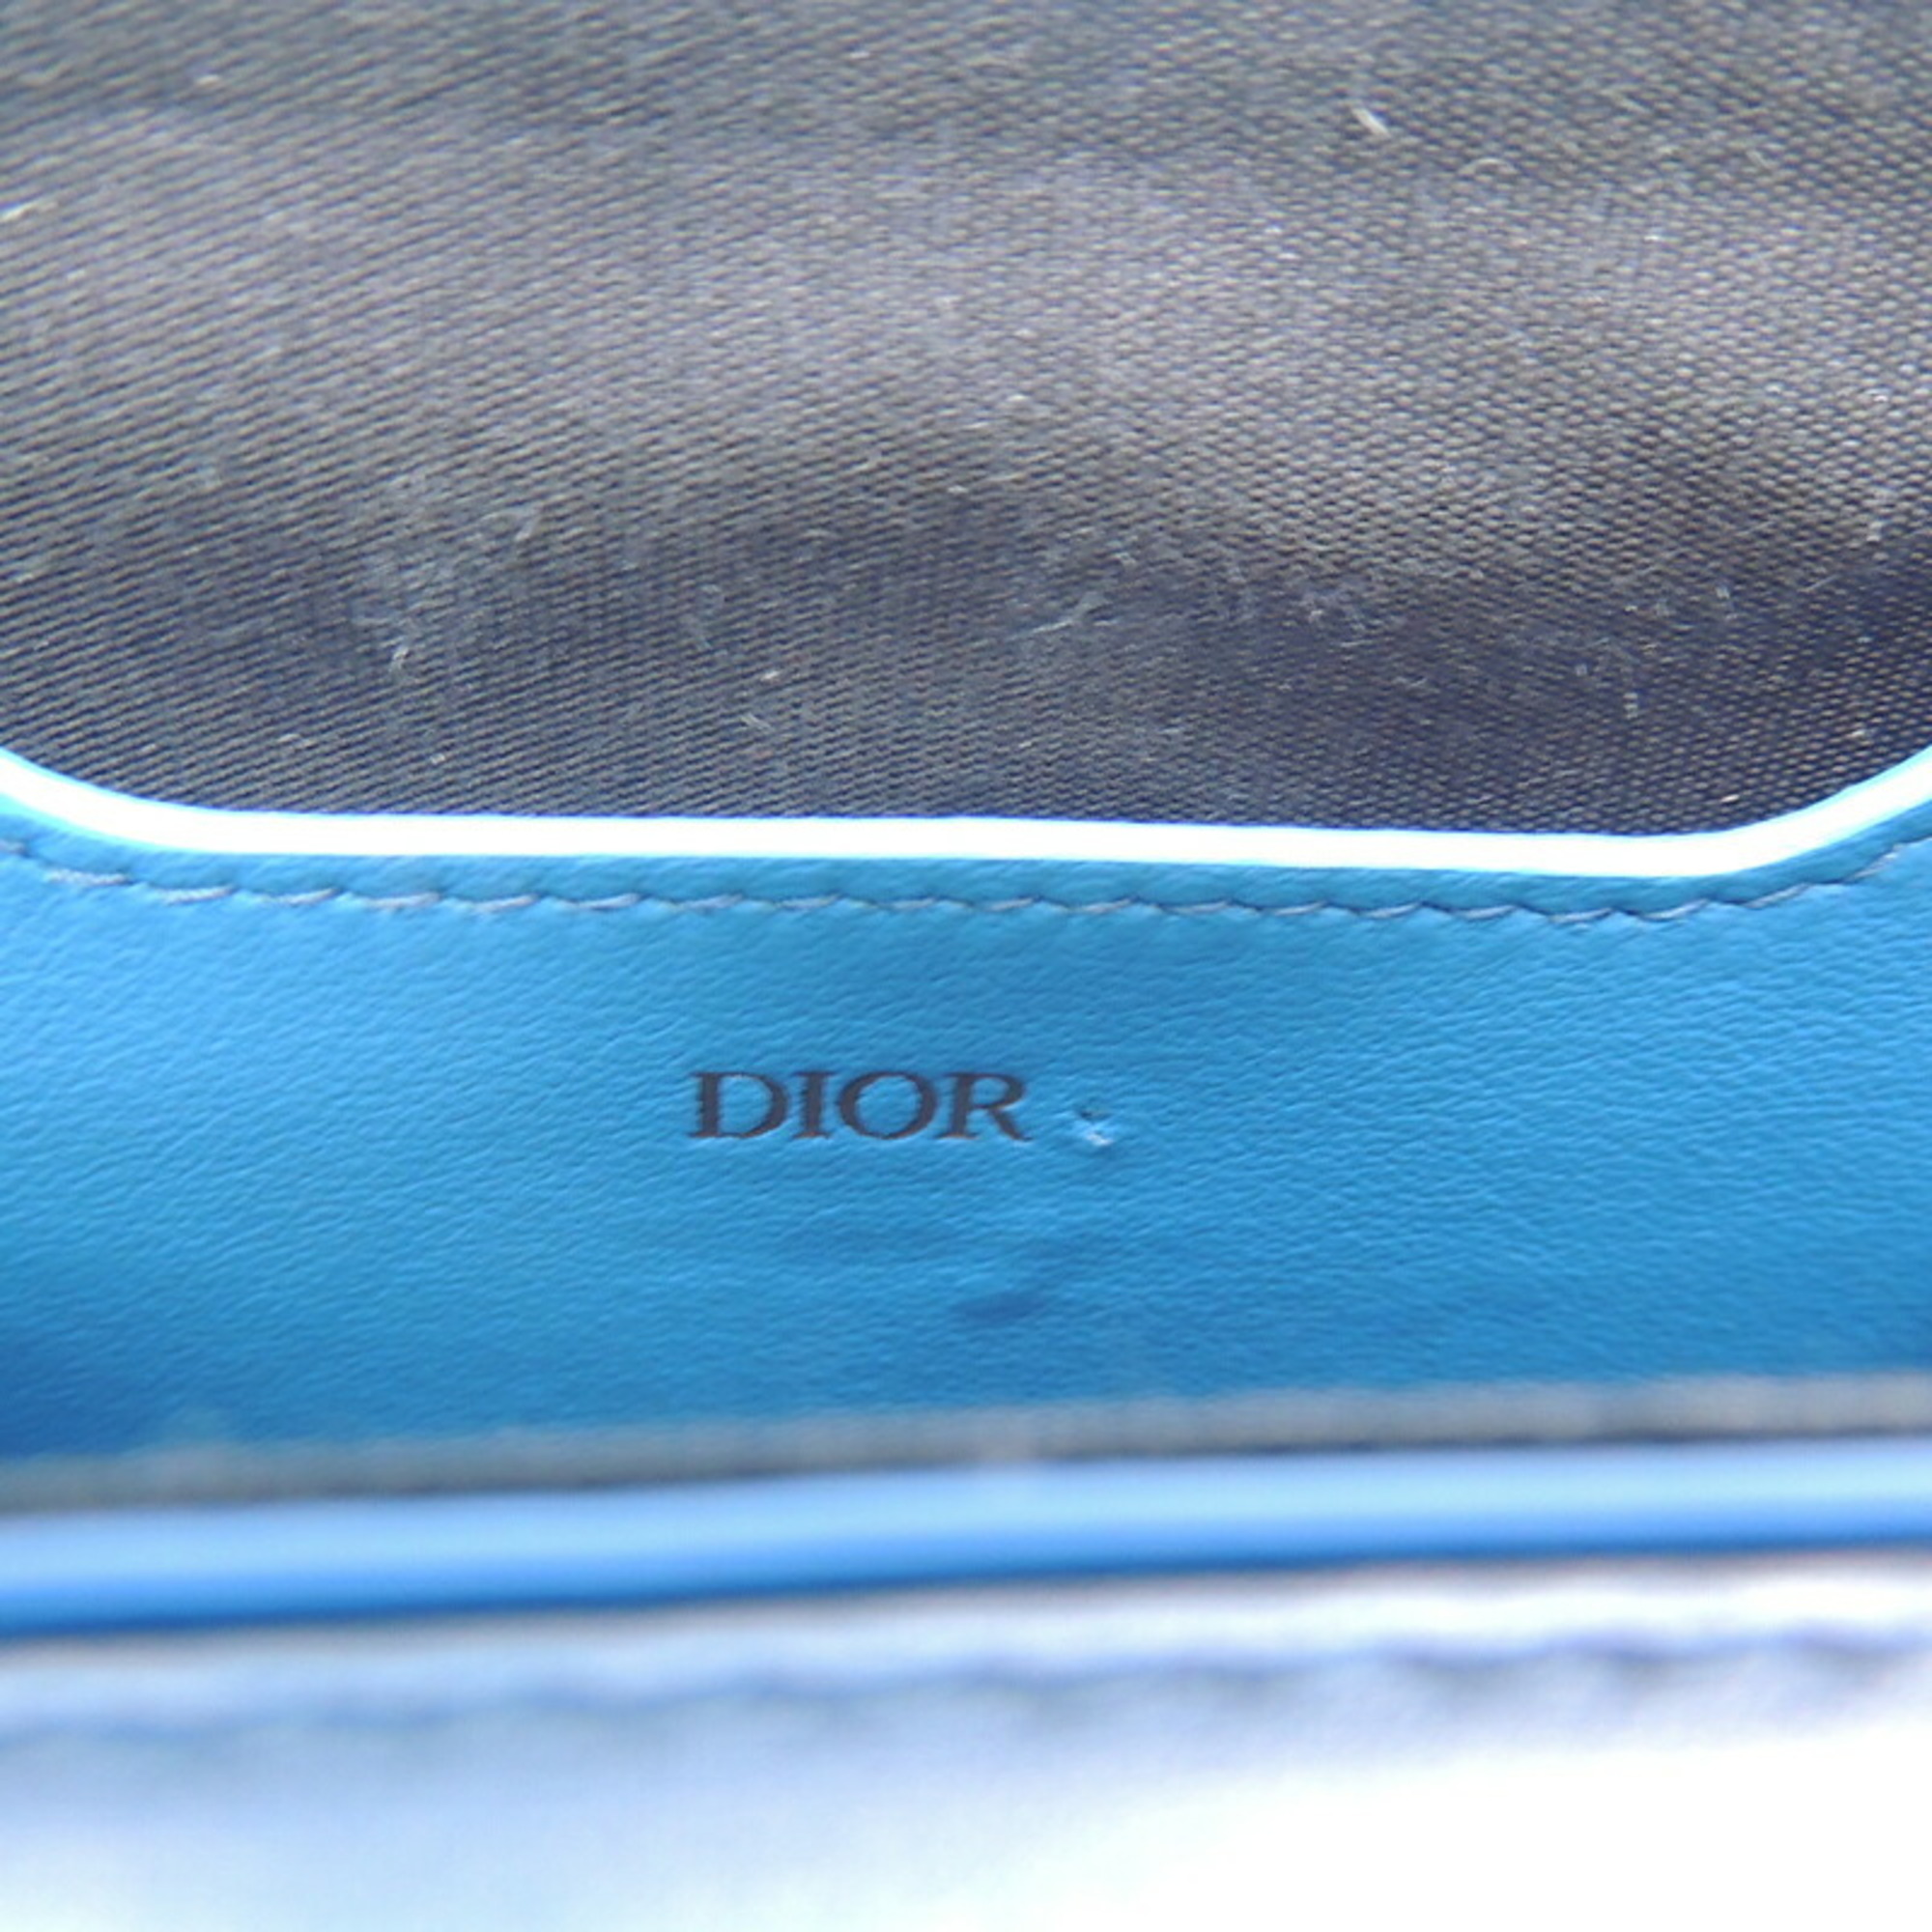 Christian Dior Dior Phone Pouch Women's Shoulder Bag Leather Blue